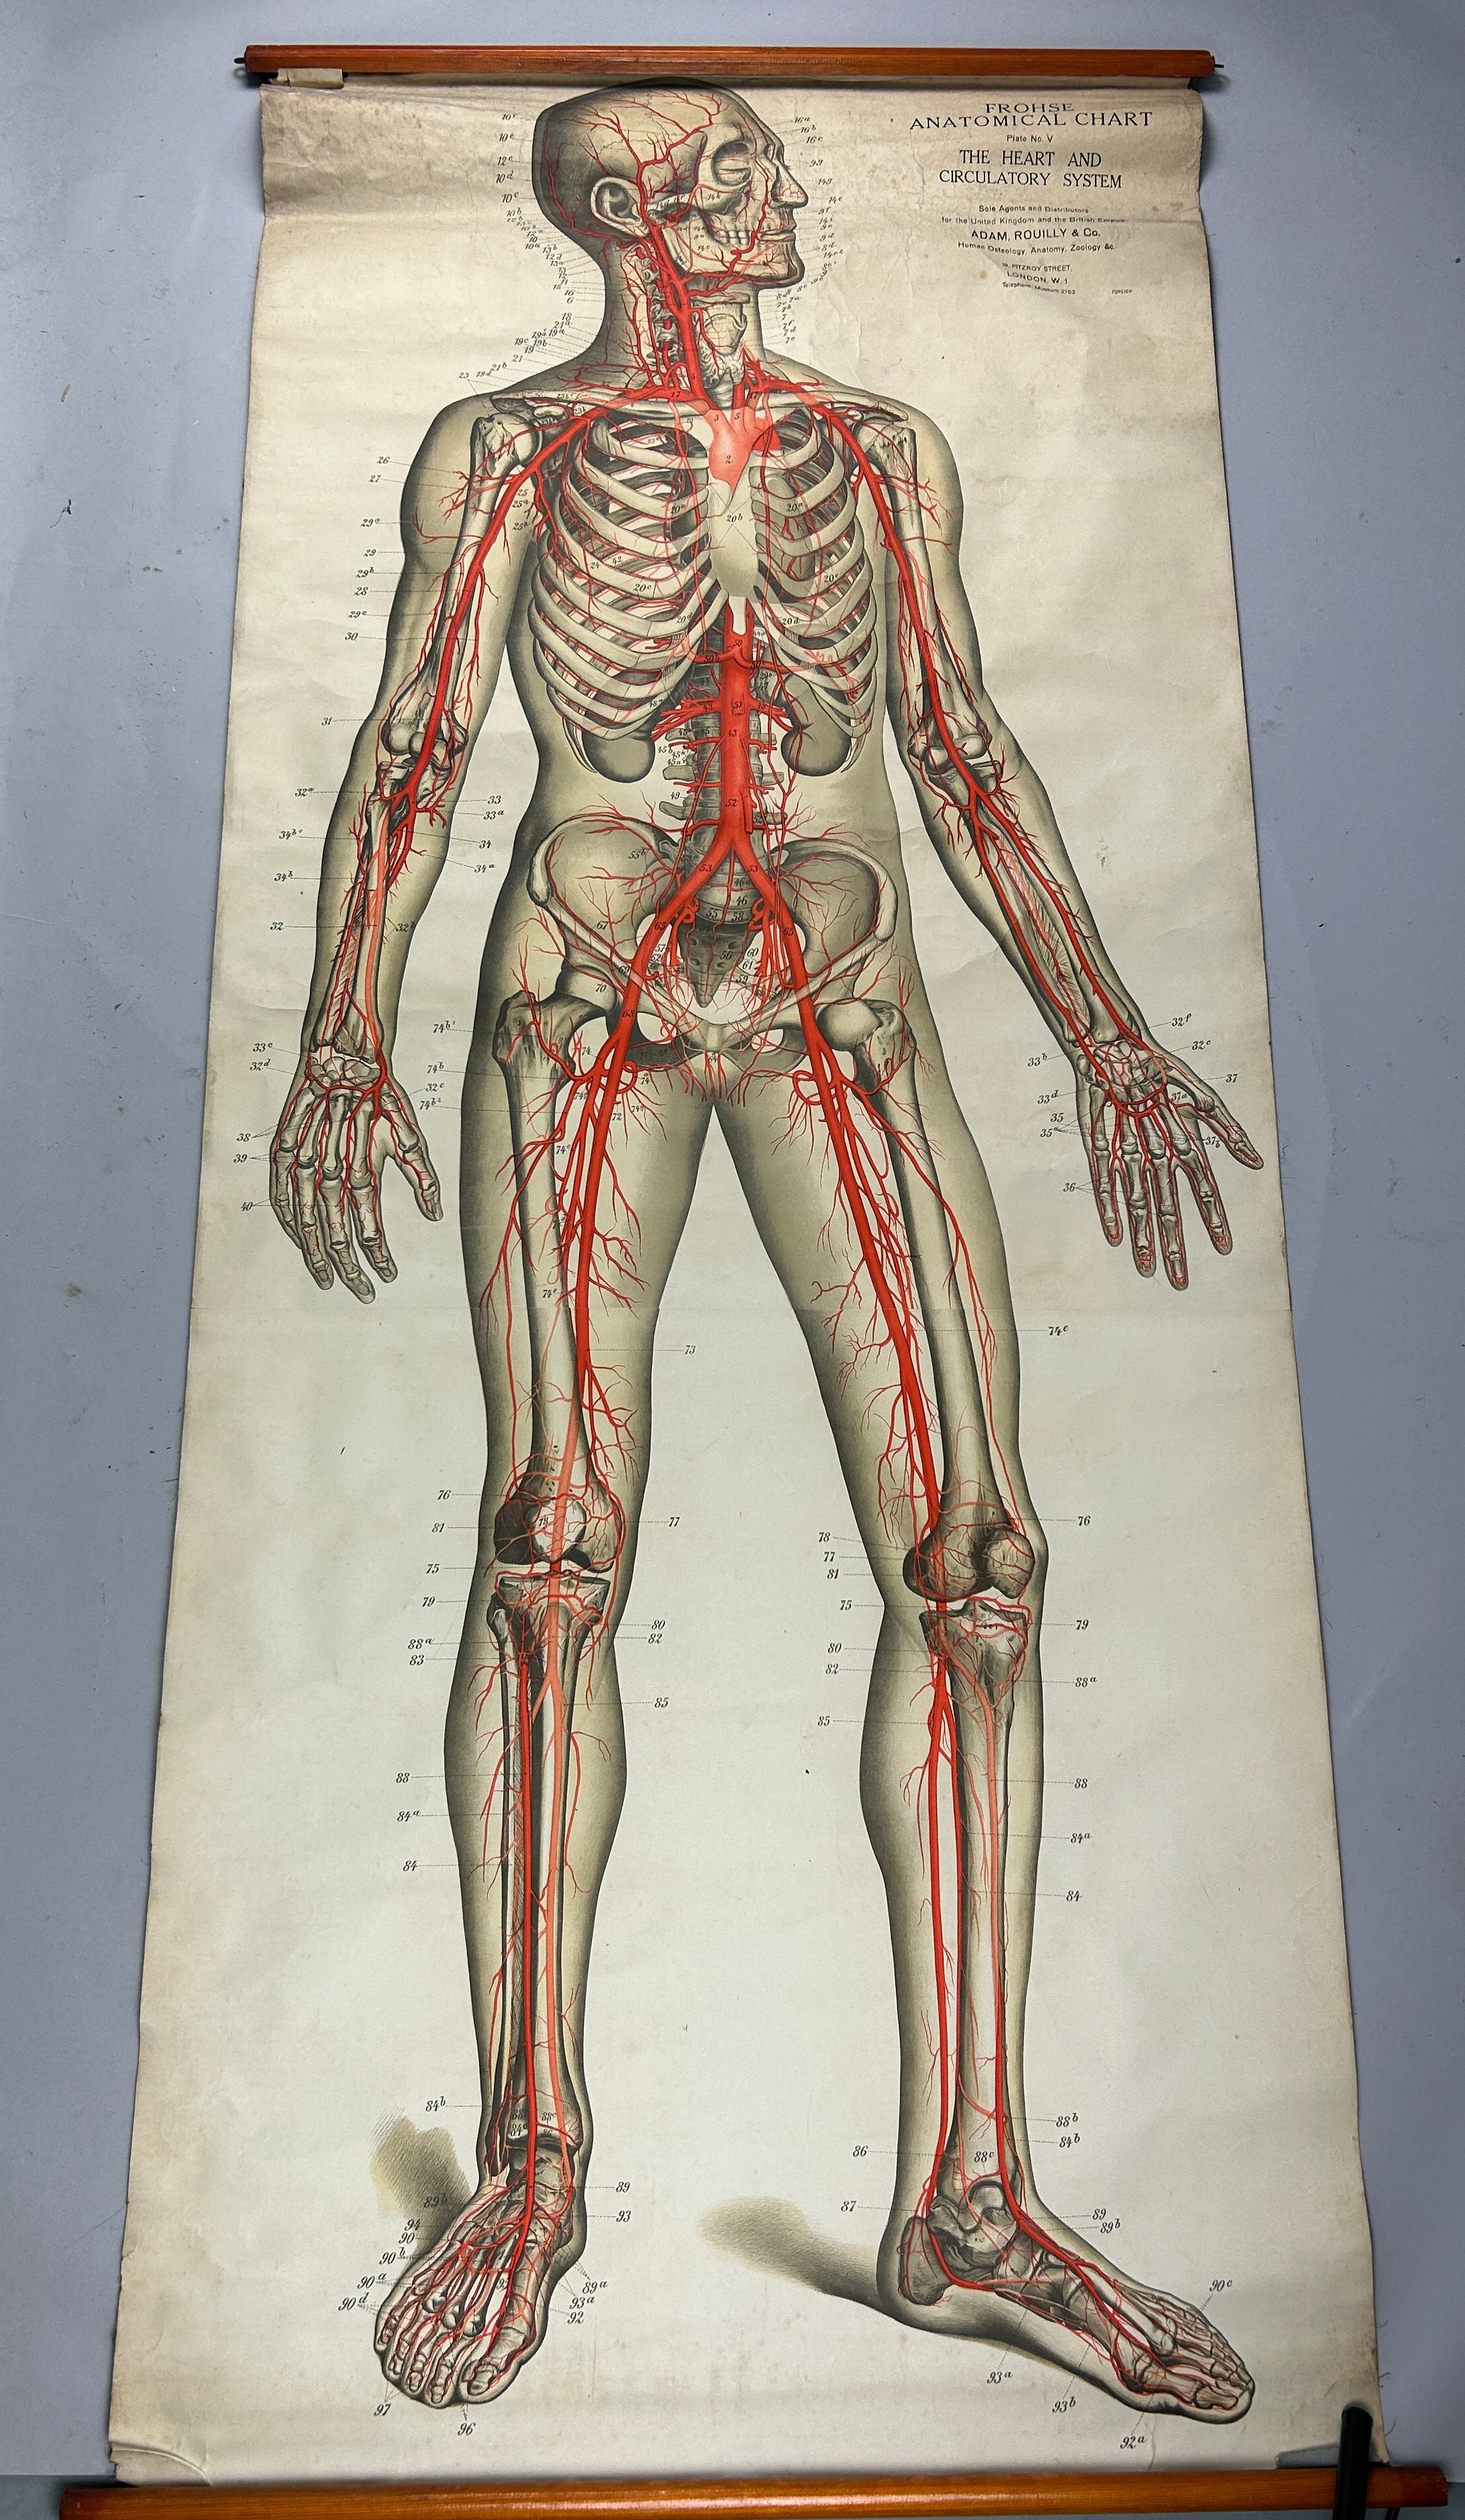 A MEDICAL FROHSE ANATOMICAL CHART 'THE HEART AND CIRCULATORY SYSTEM', hanging scroll by Adam, - Image 3 of 5